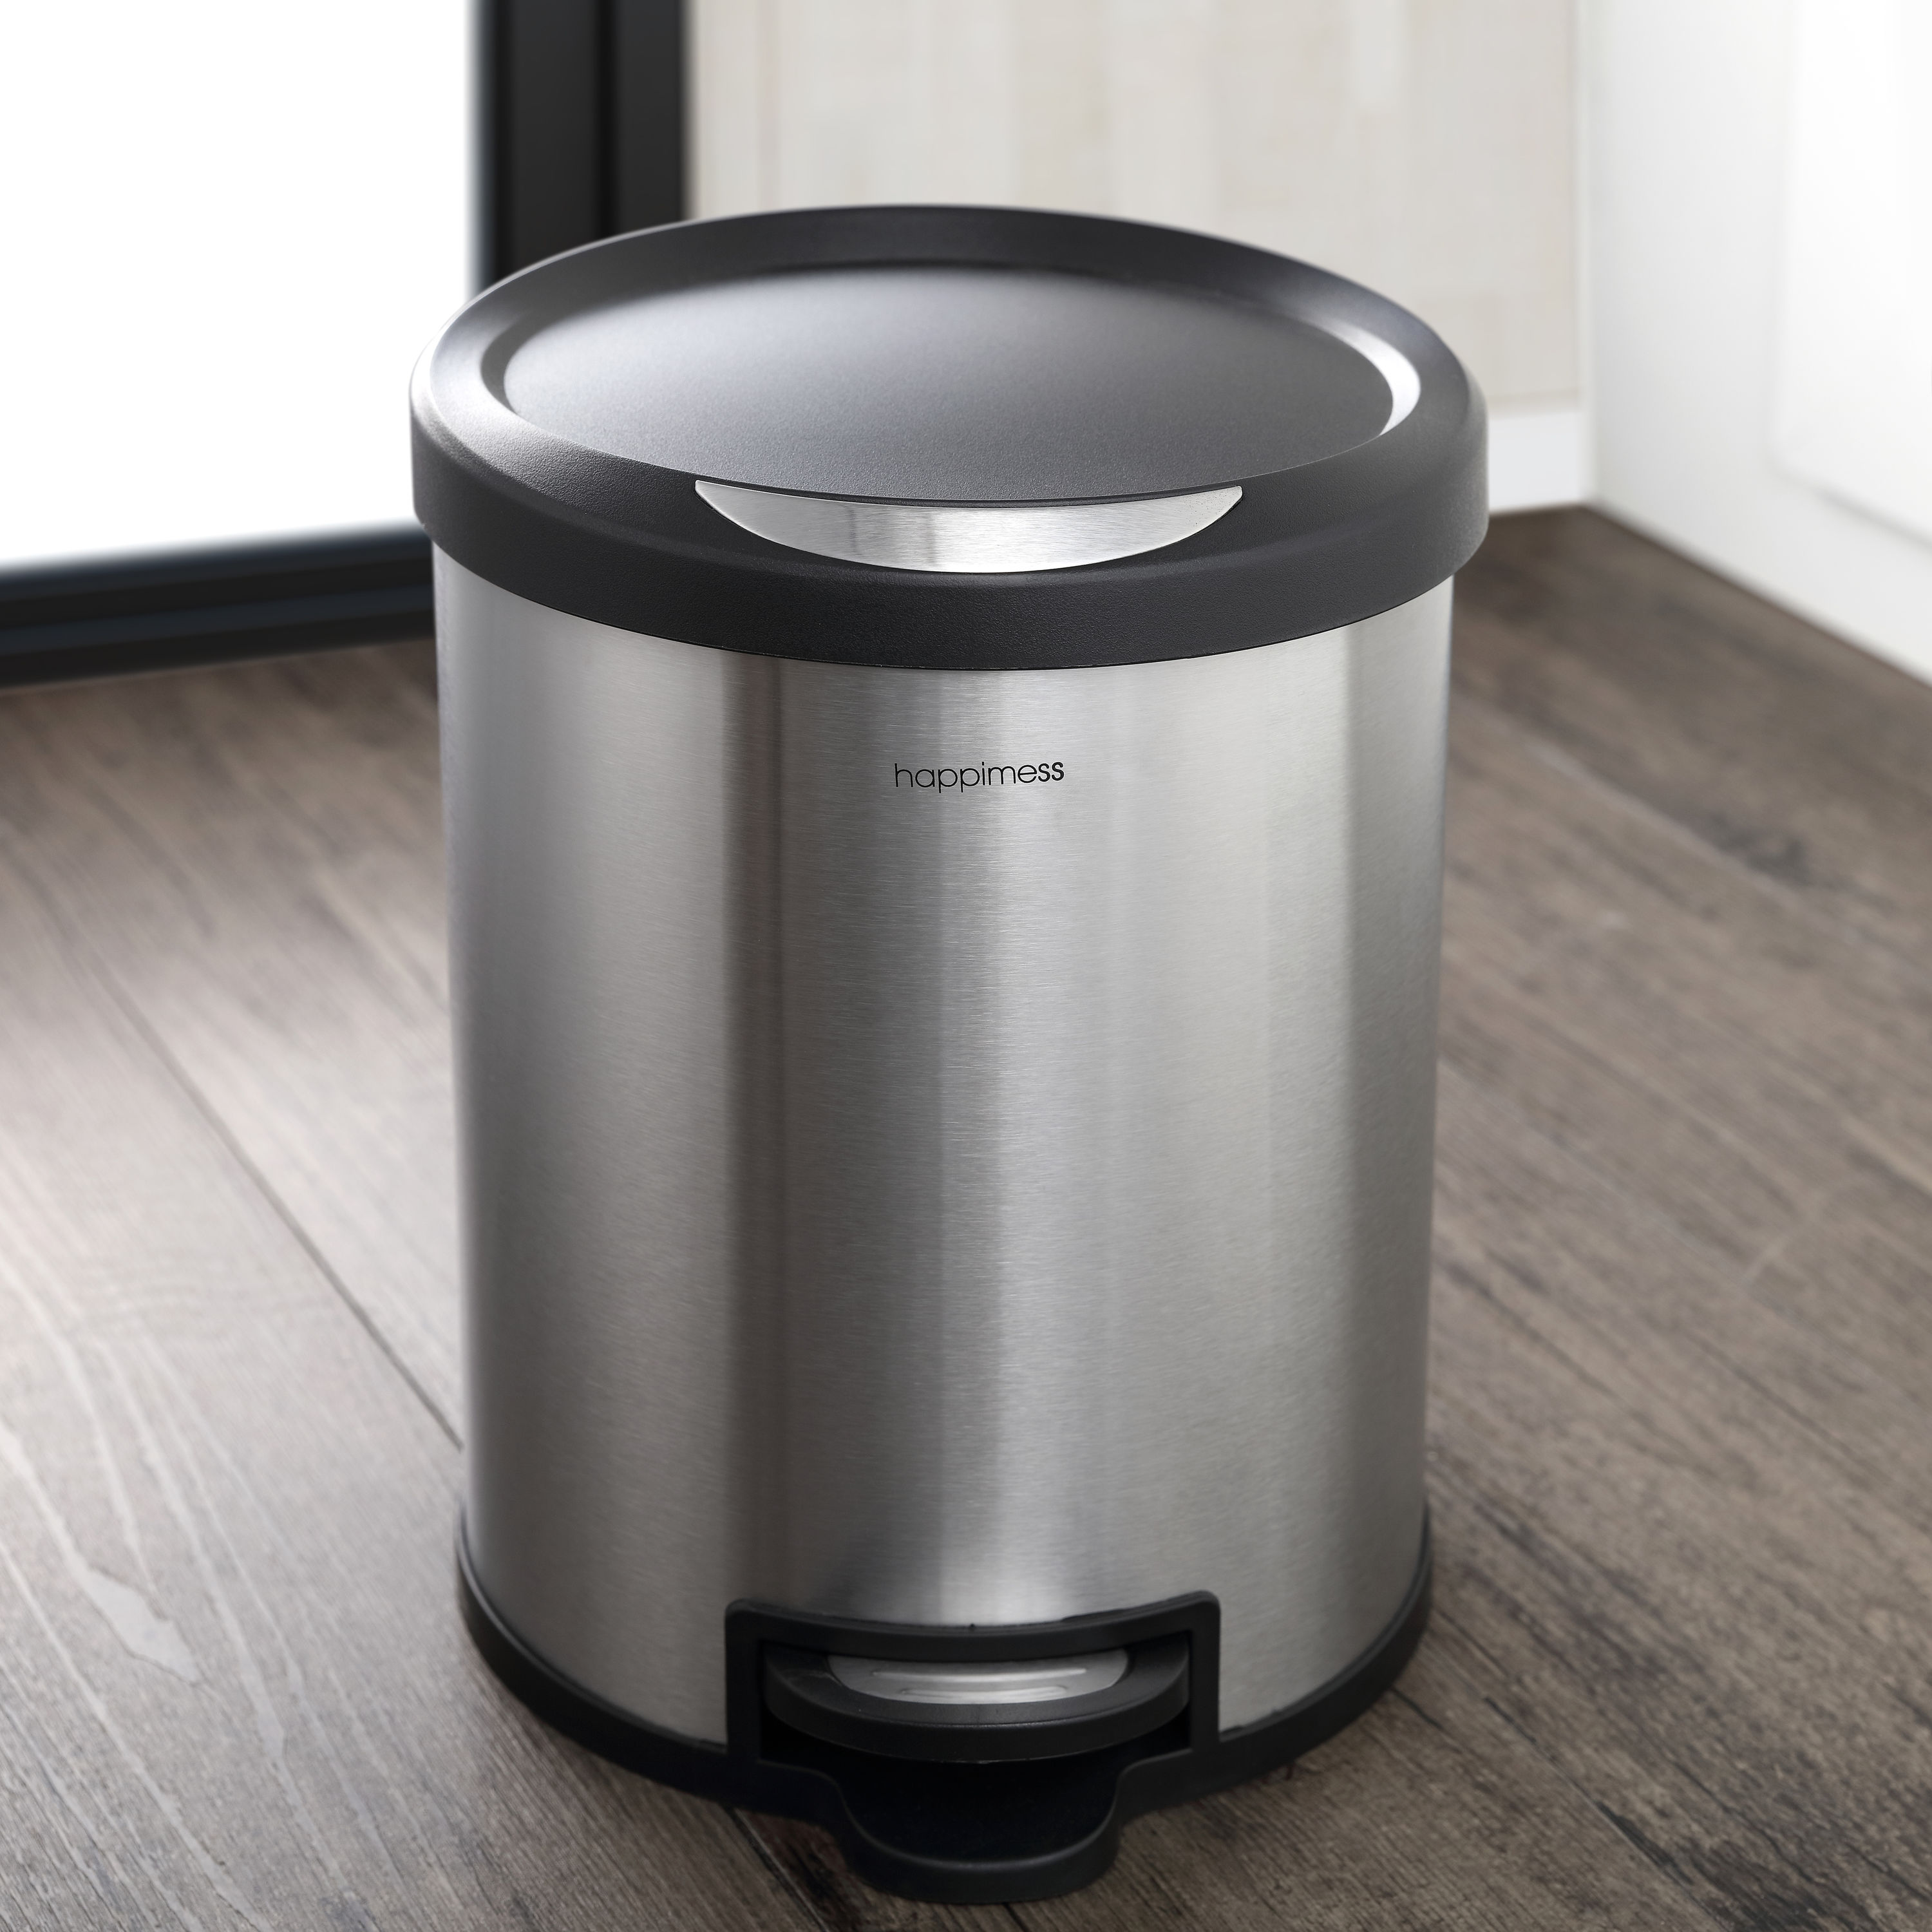 Mainstays Round 7.9-Gallon Trash Can, Stainless Steel 